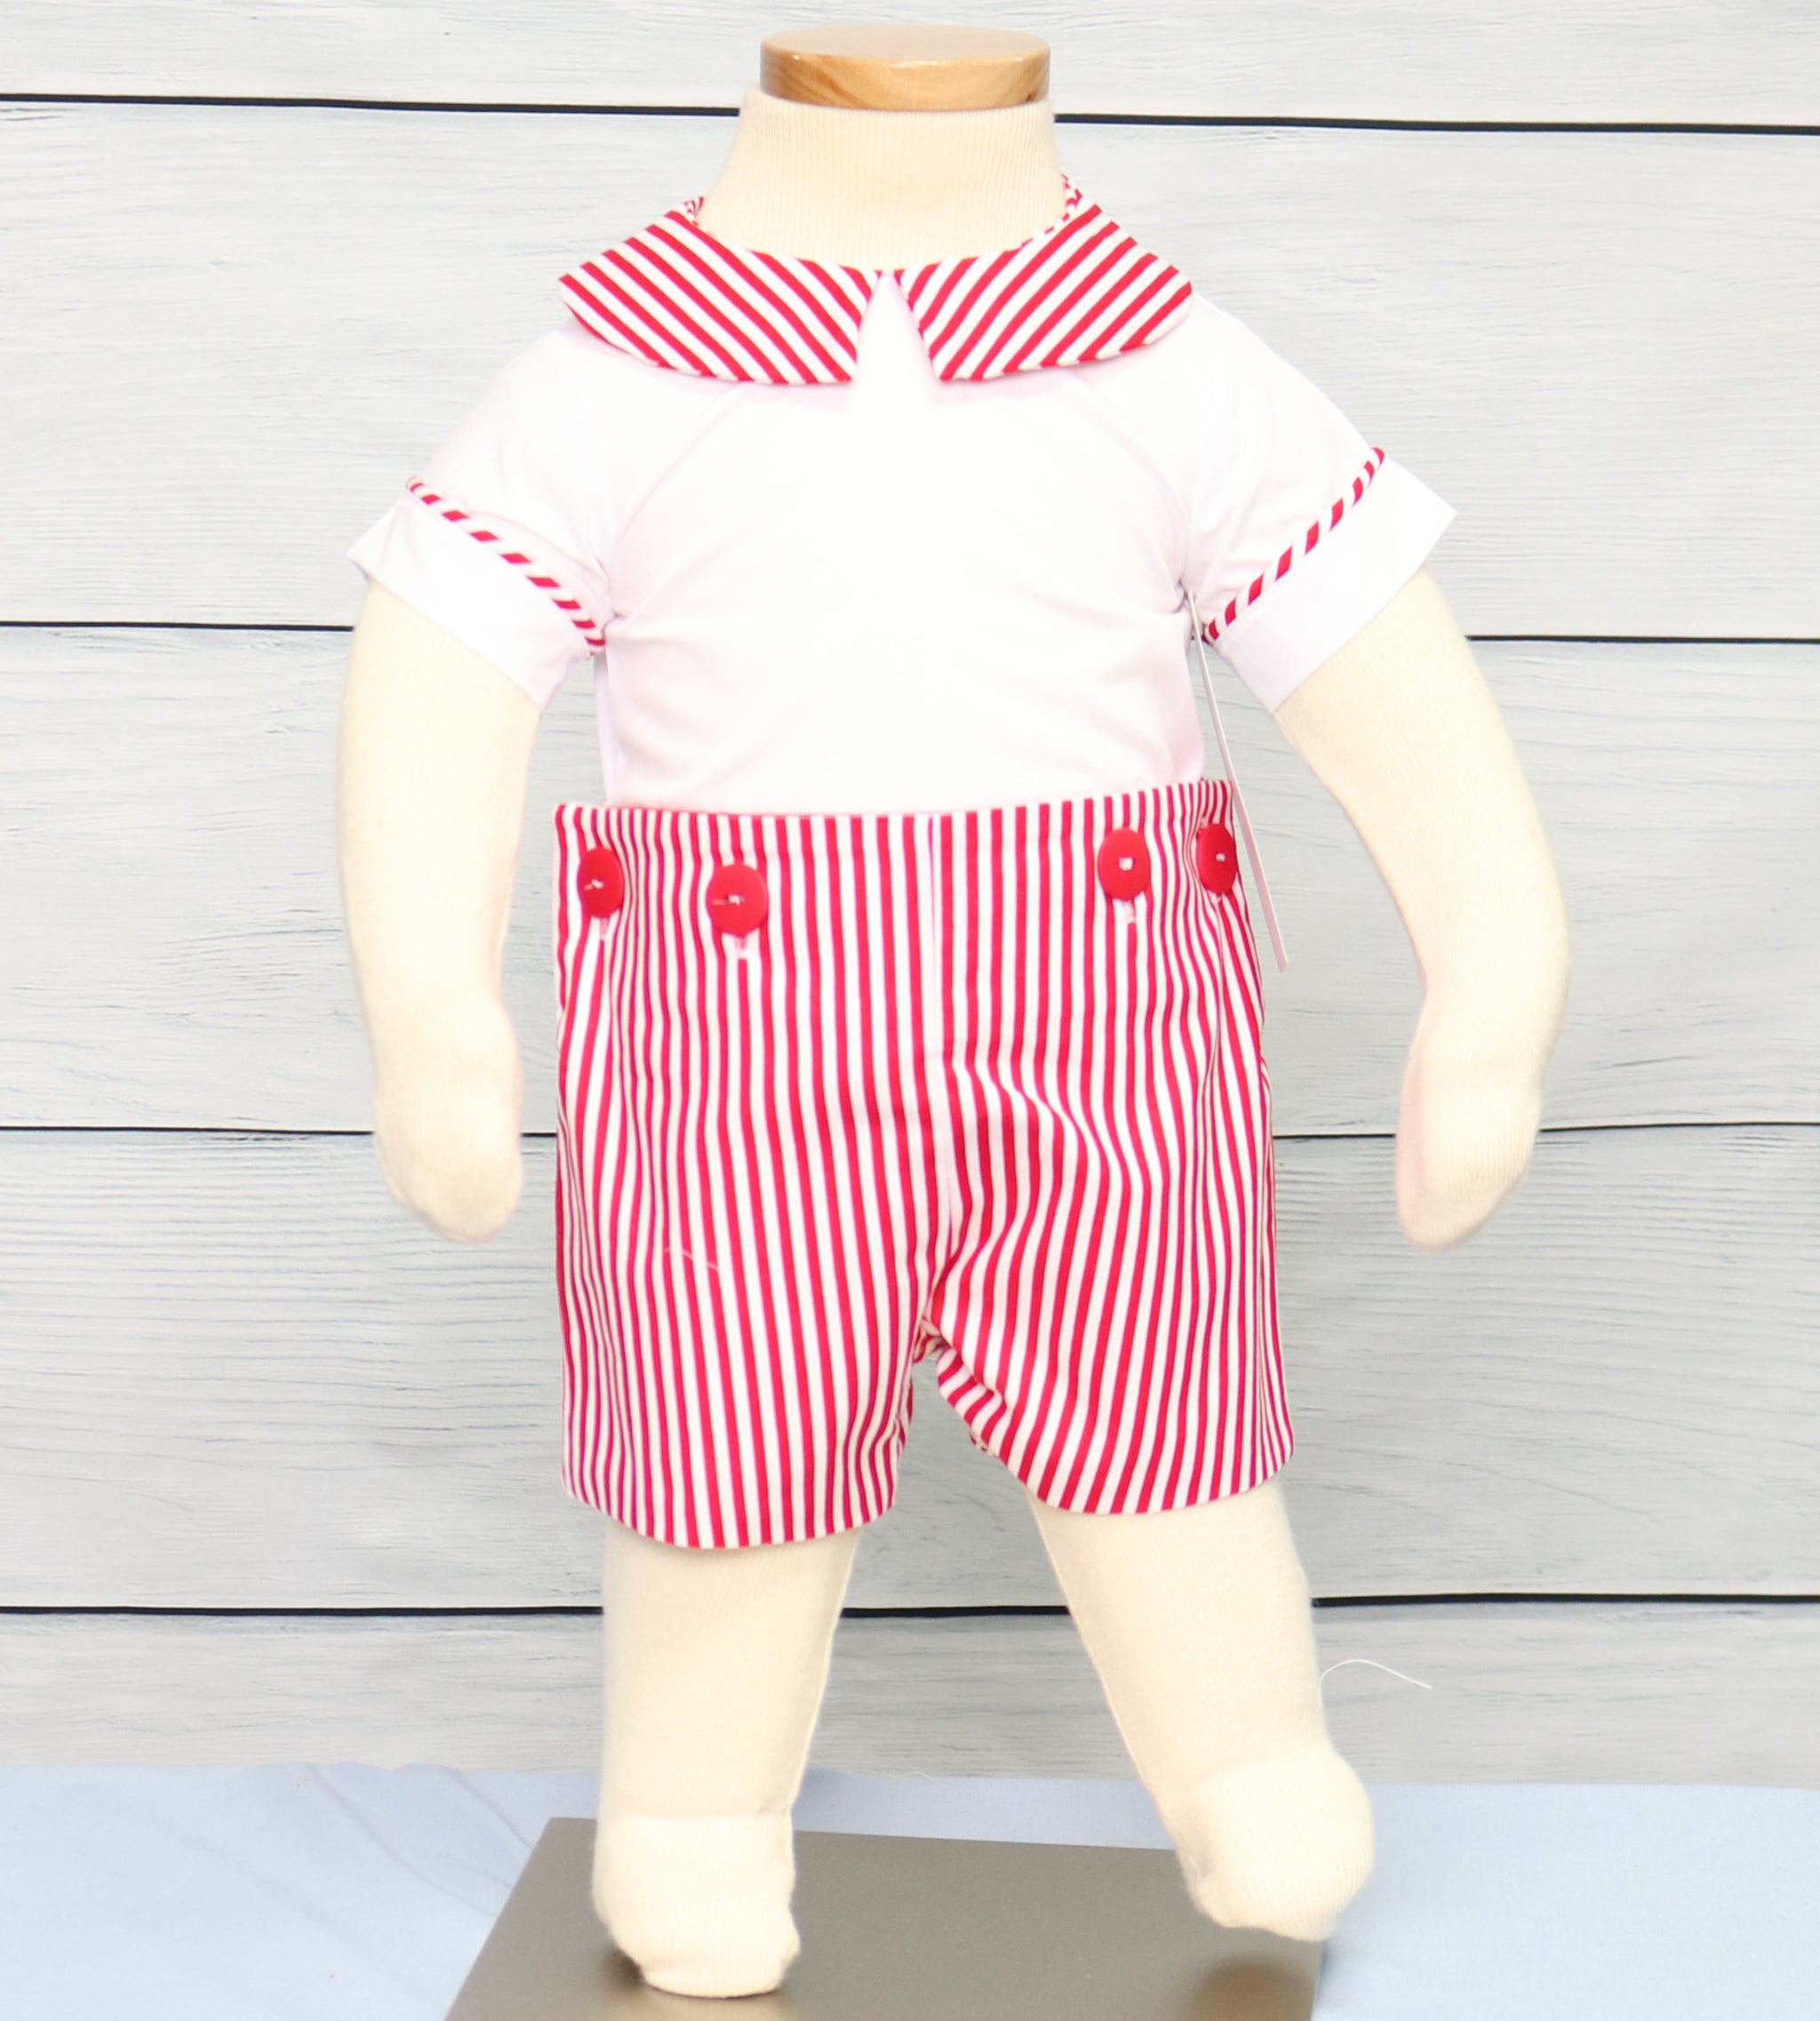 christmas outfits for newborn baby boy